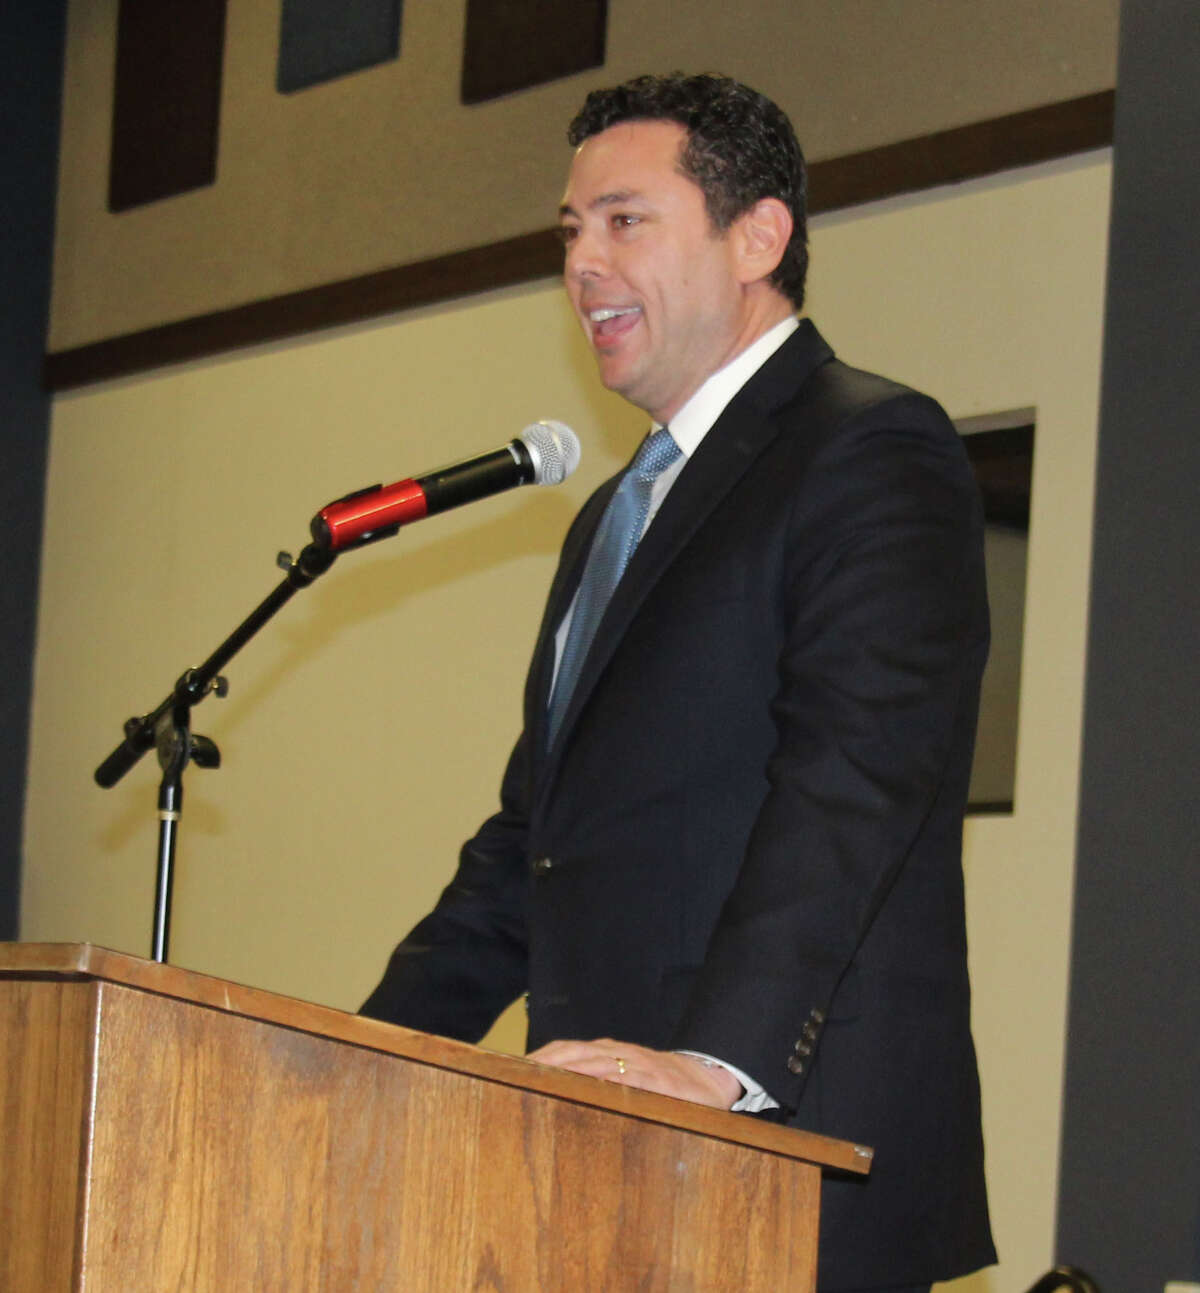 Jason Chaffetz is the guest speaker of the San Jacinto County Republican Party's annual Reagan Dinner on Feb. 17. He discussed much of his own background, personal philosophy and the Benghazi incident.